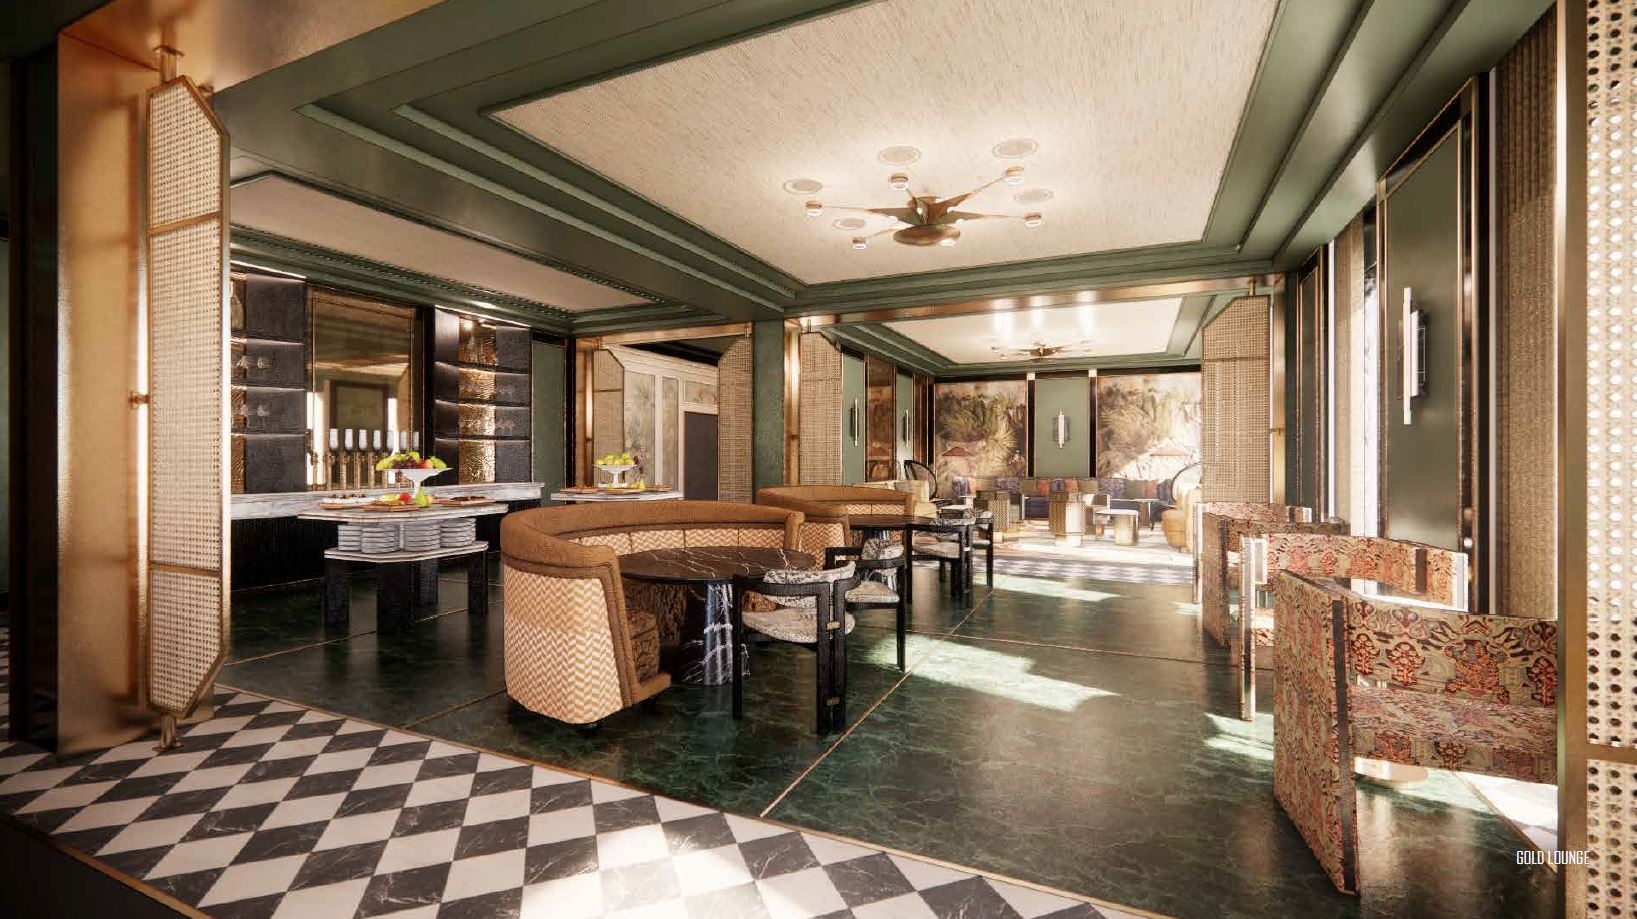 Fairmont Hotels & Resorts has announced that it will open a new luxury hotel in New Orleans